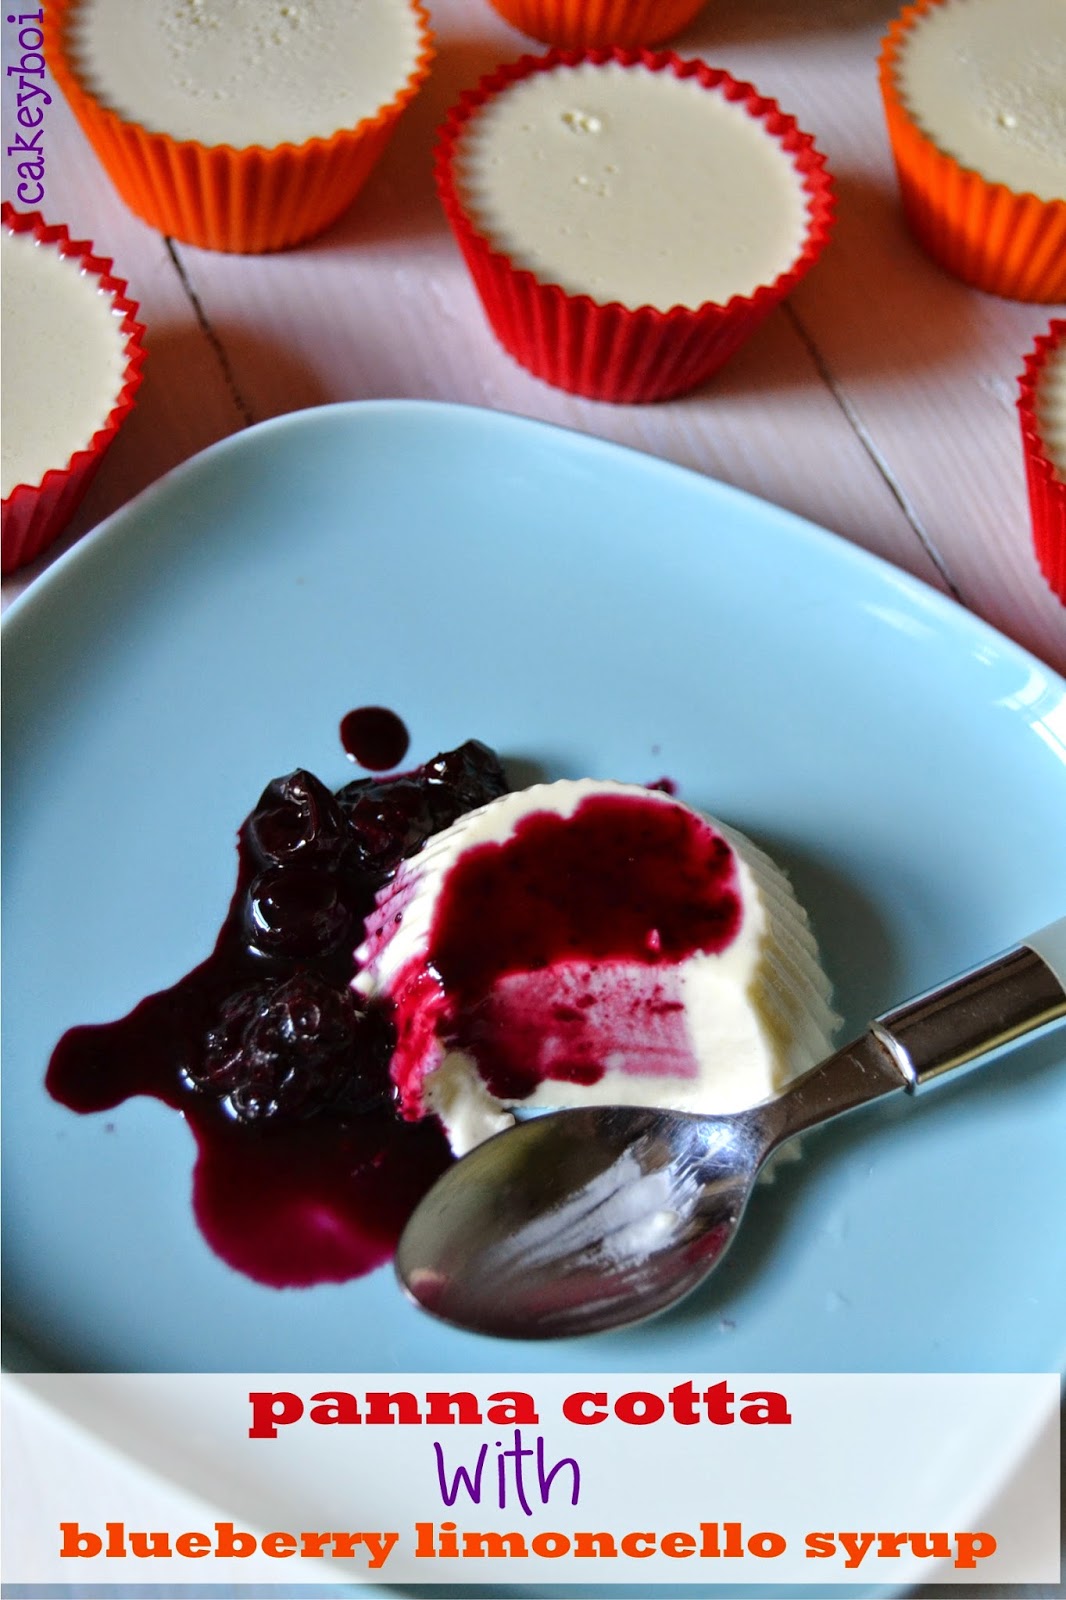 Panna Cotta with Blueberry Limoncello Syrup